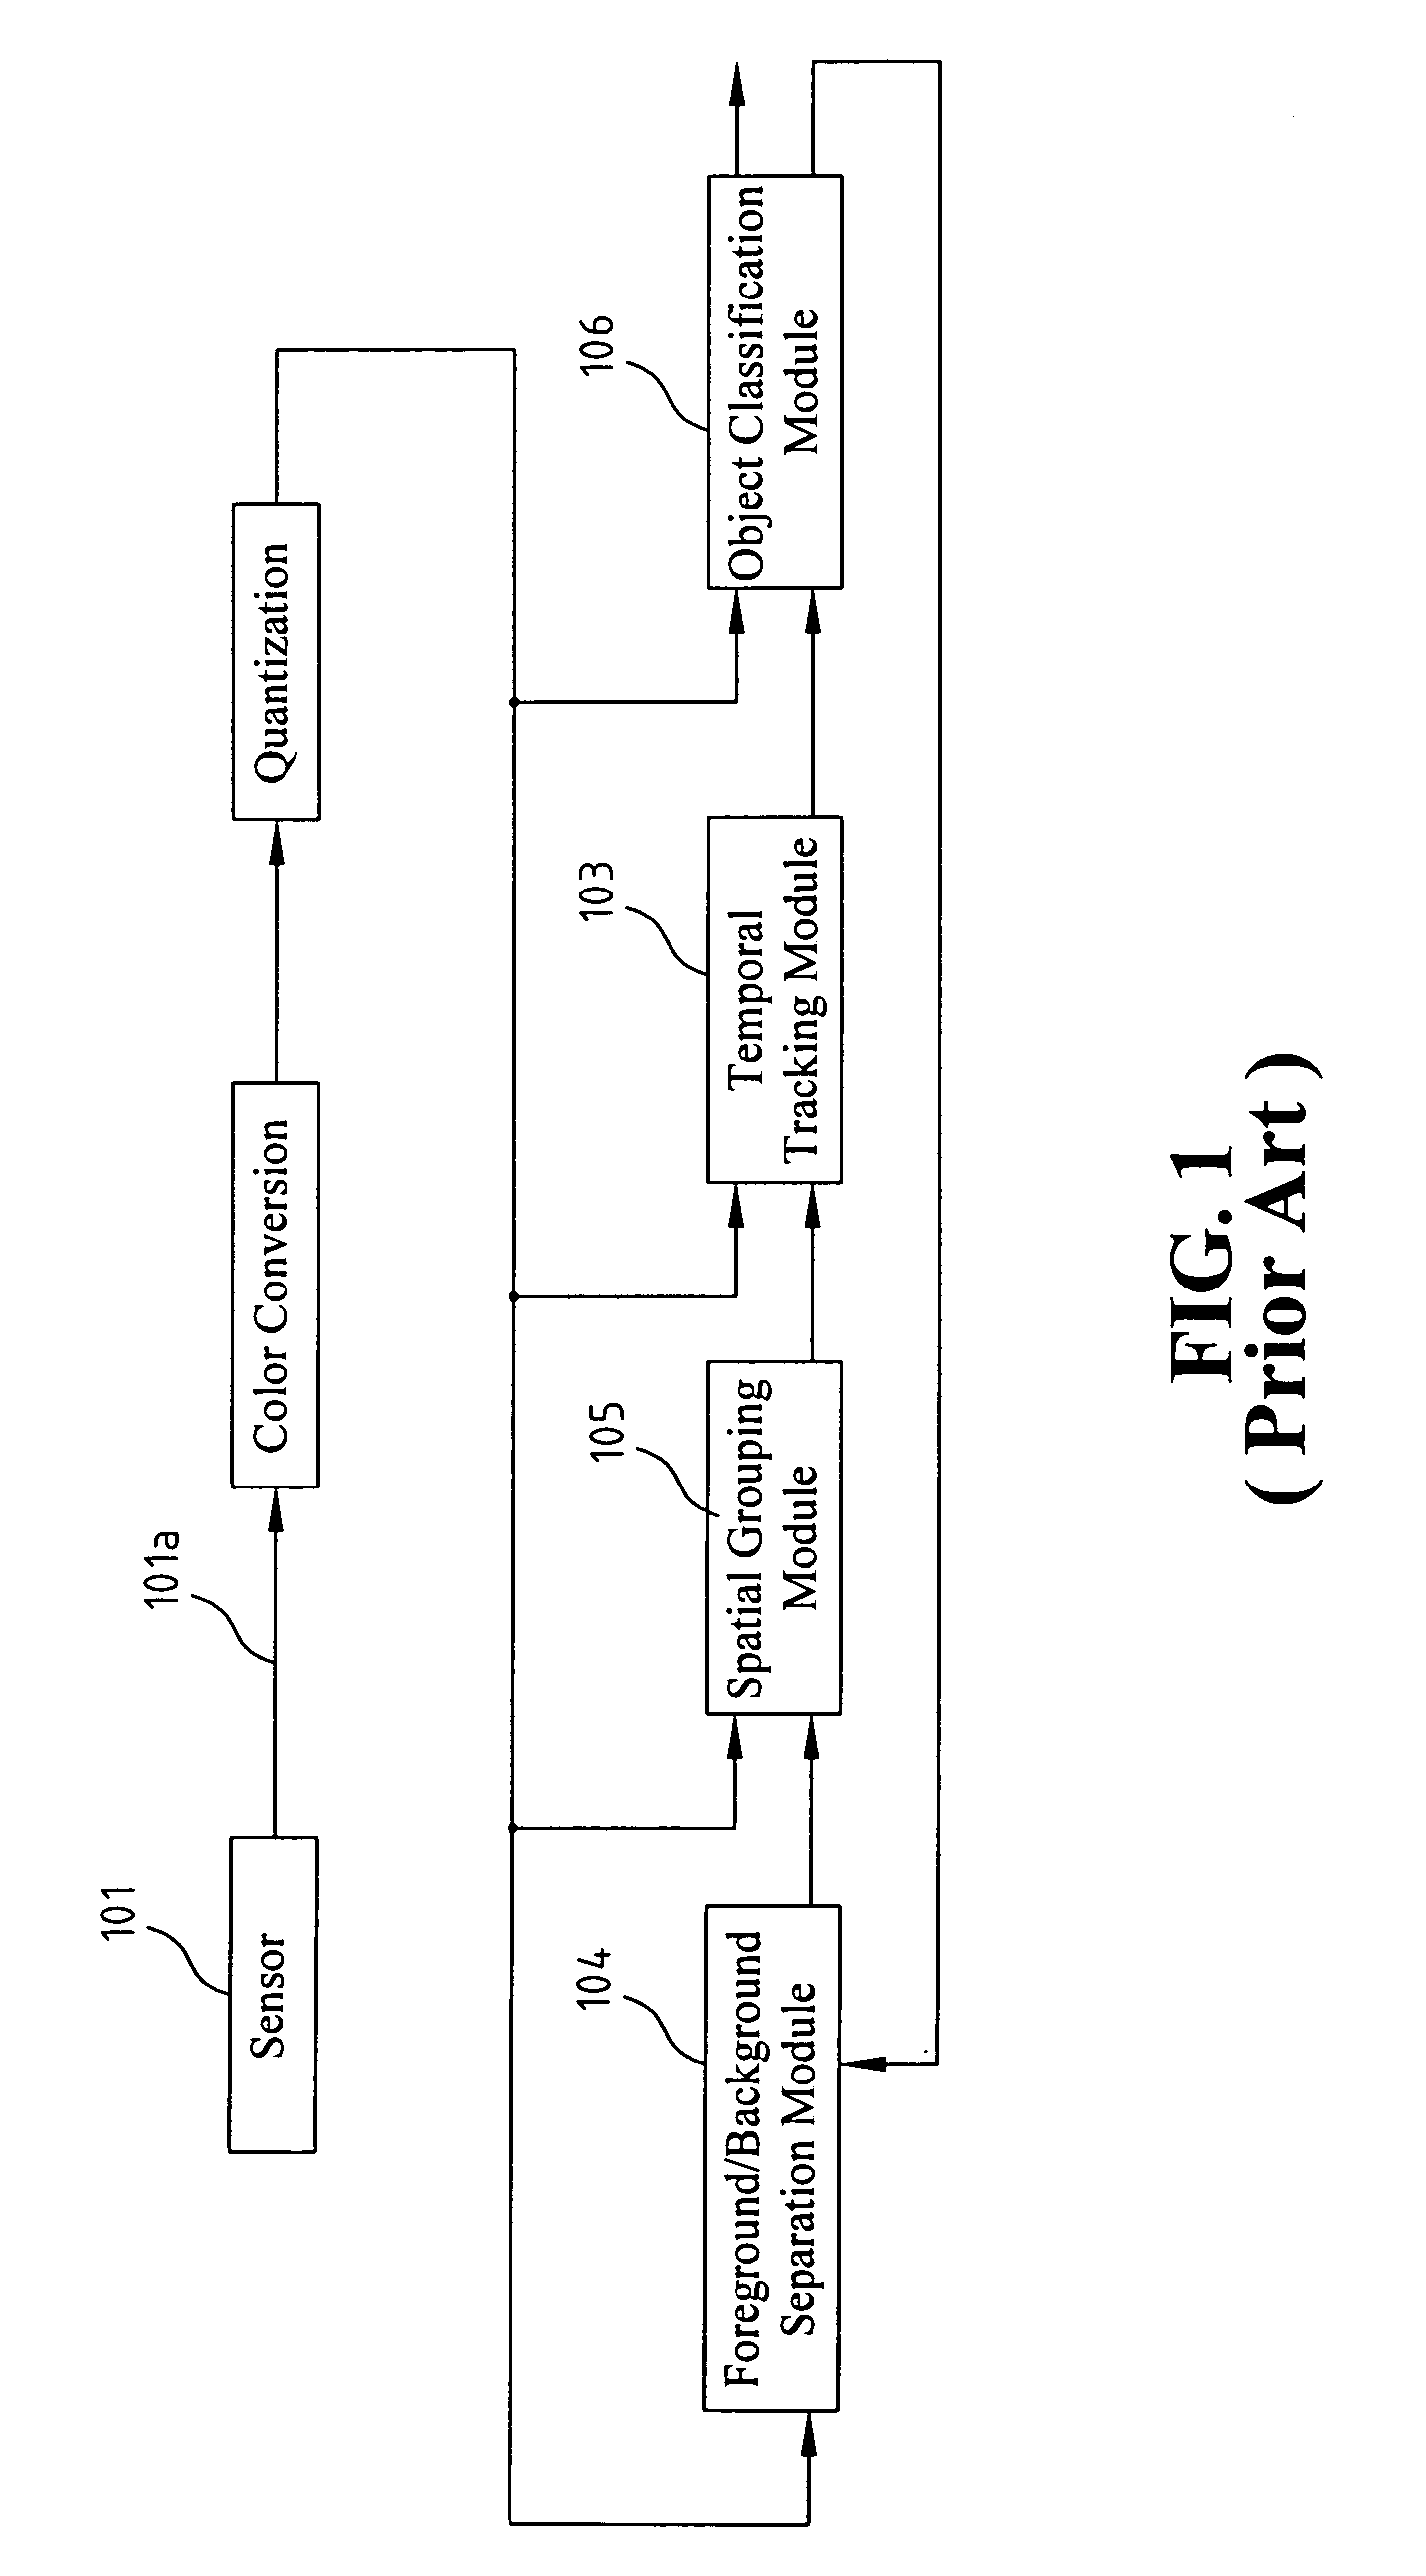 Method And System For Object Detection And Tracking